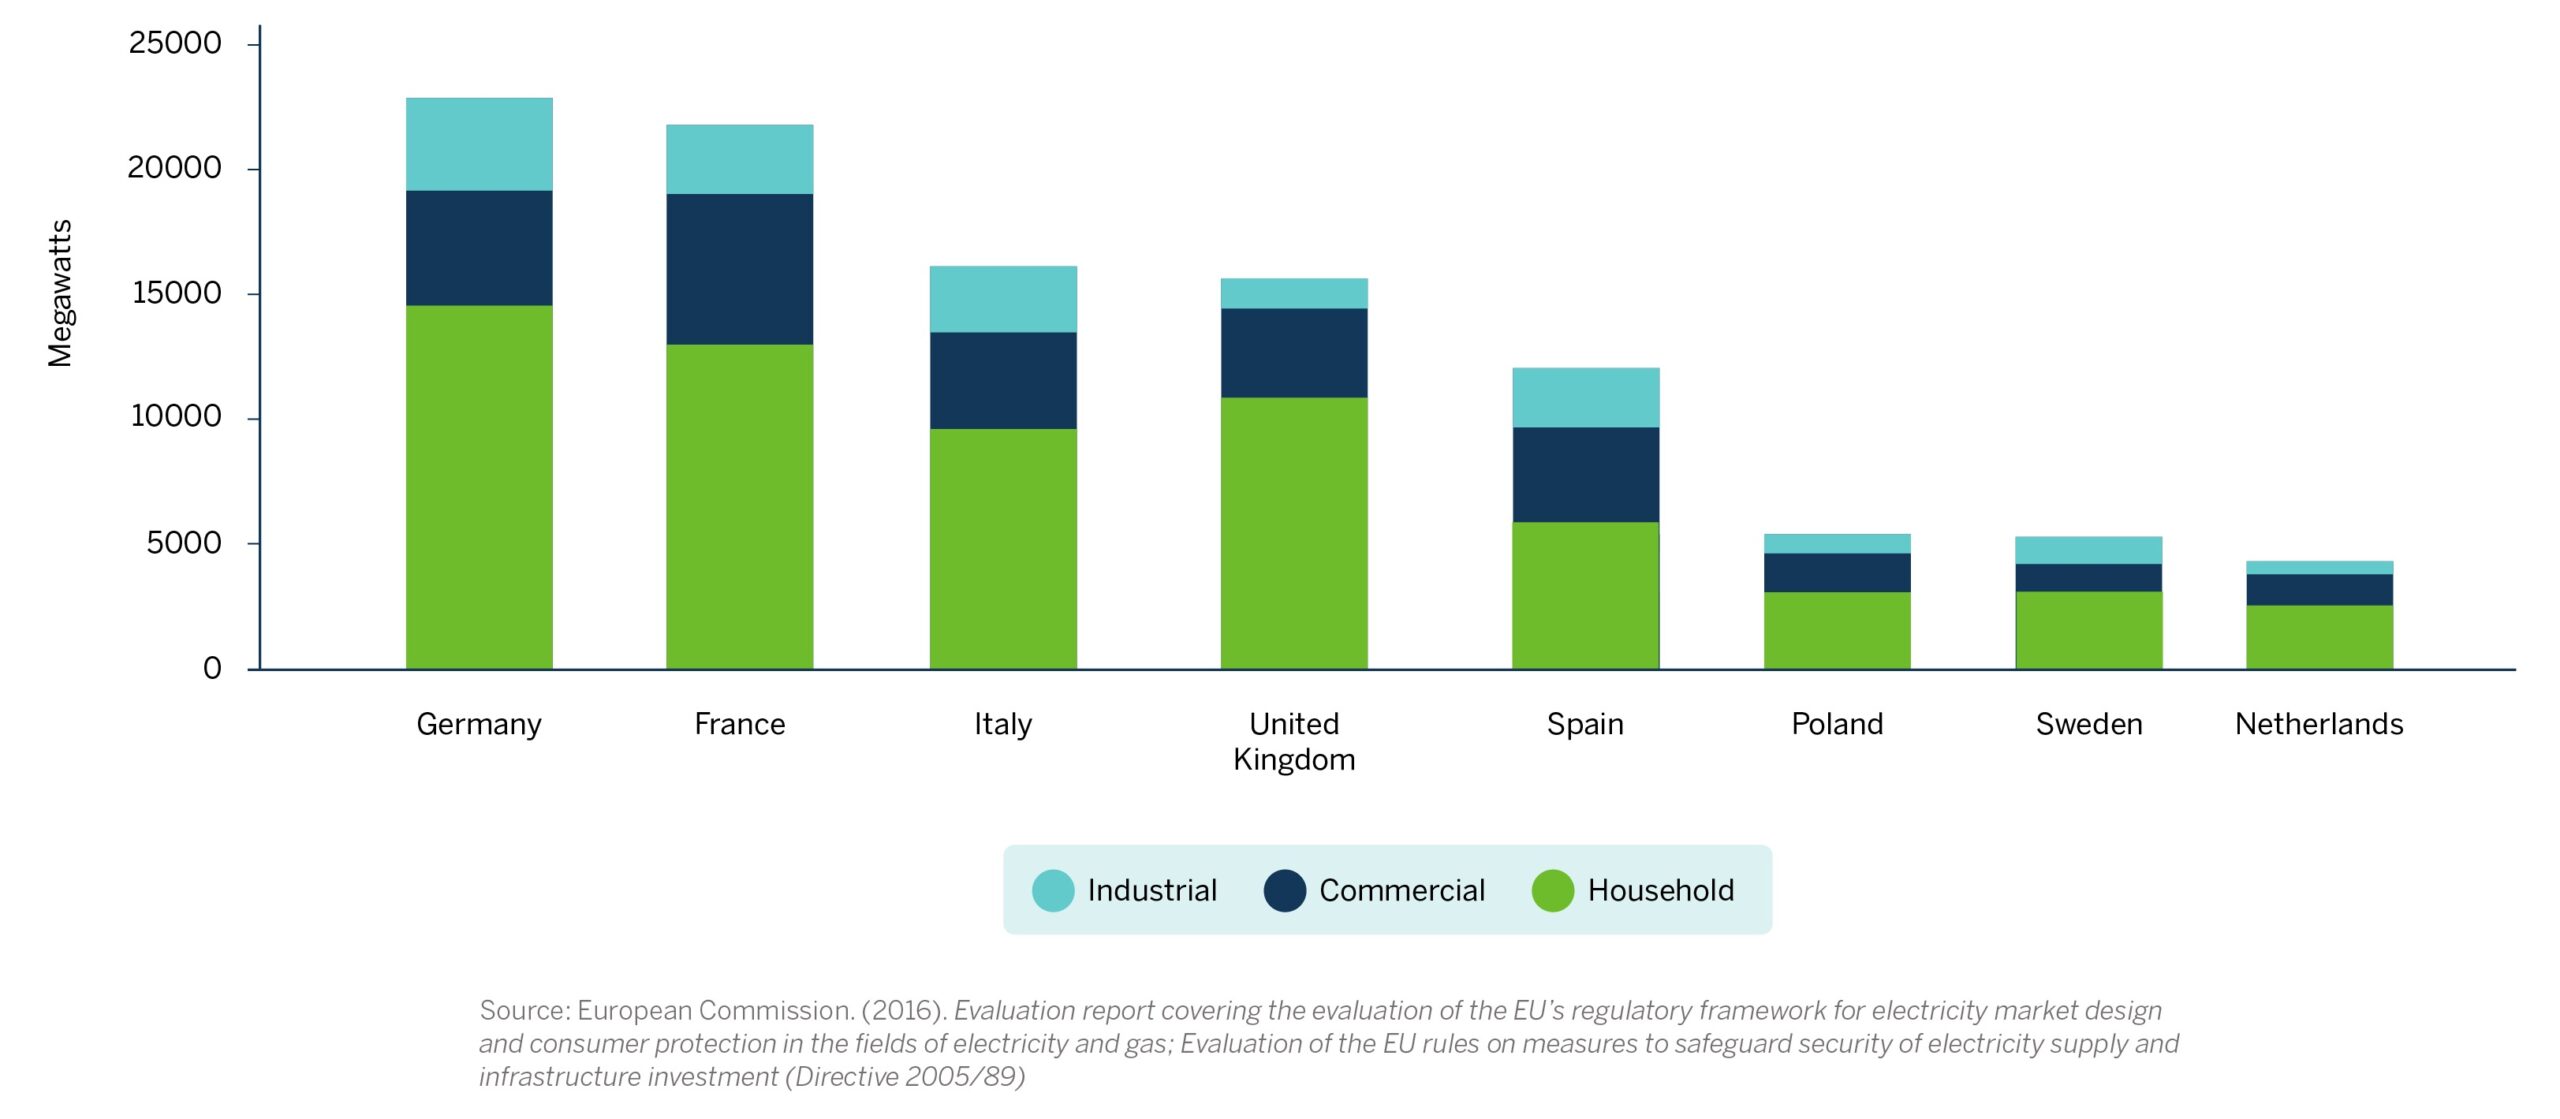 graphic depicting the theoretical potential in megawatts of demand-response capacity in selected European countries by 2030